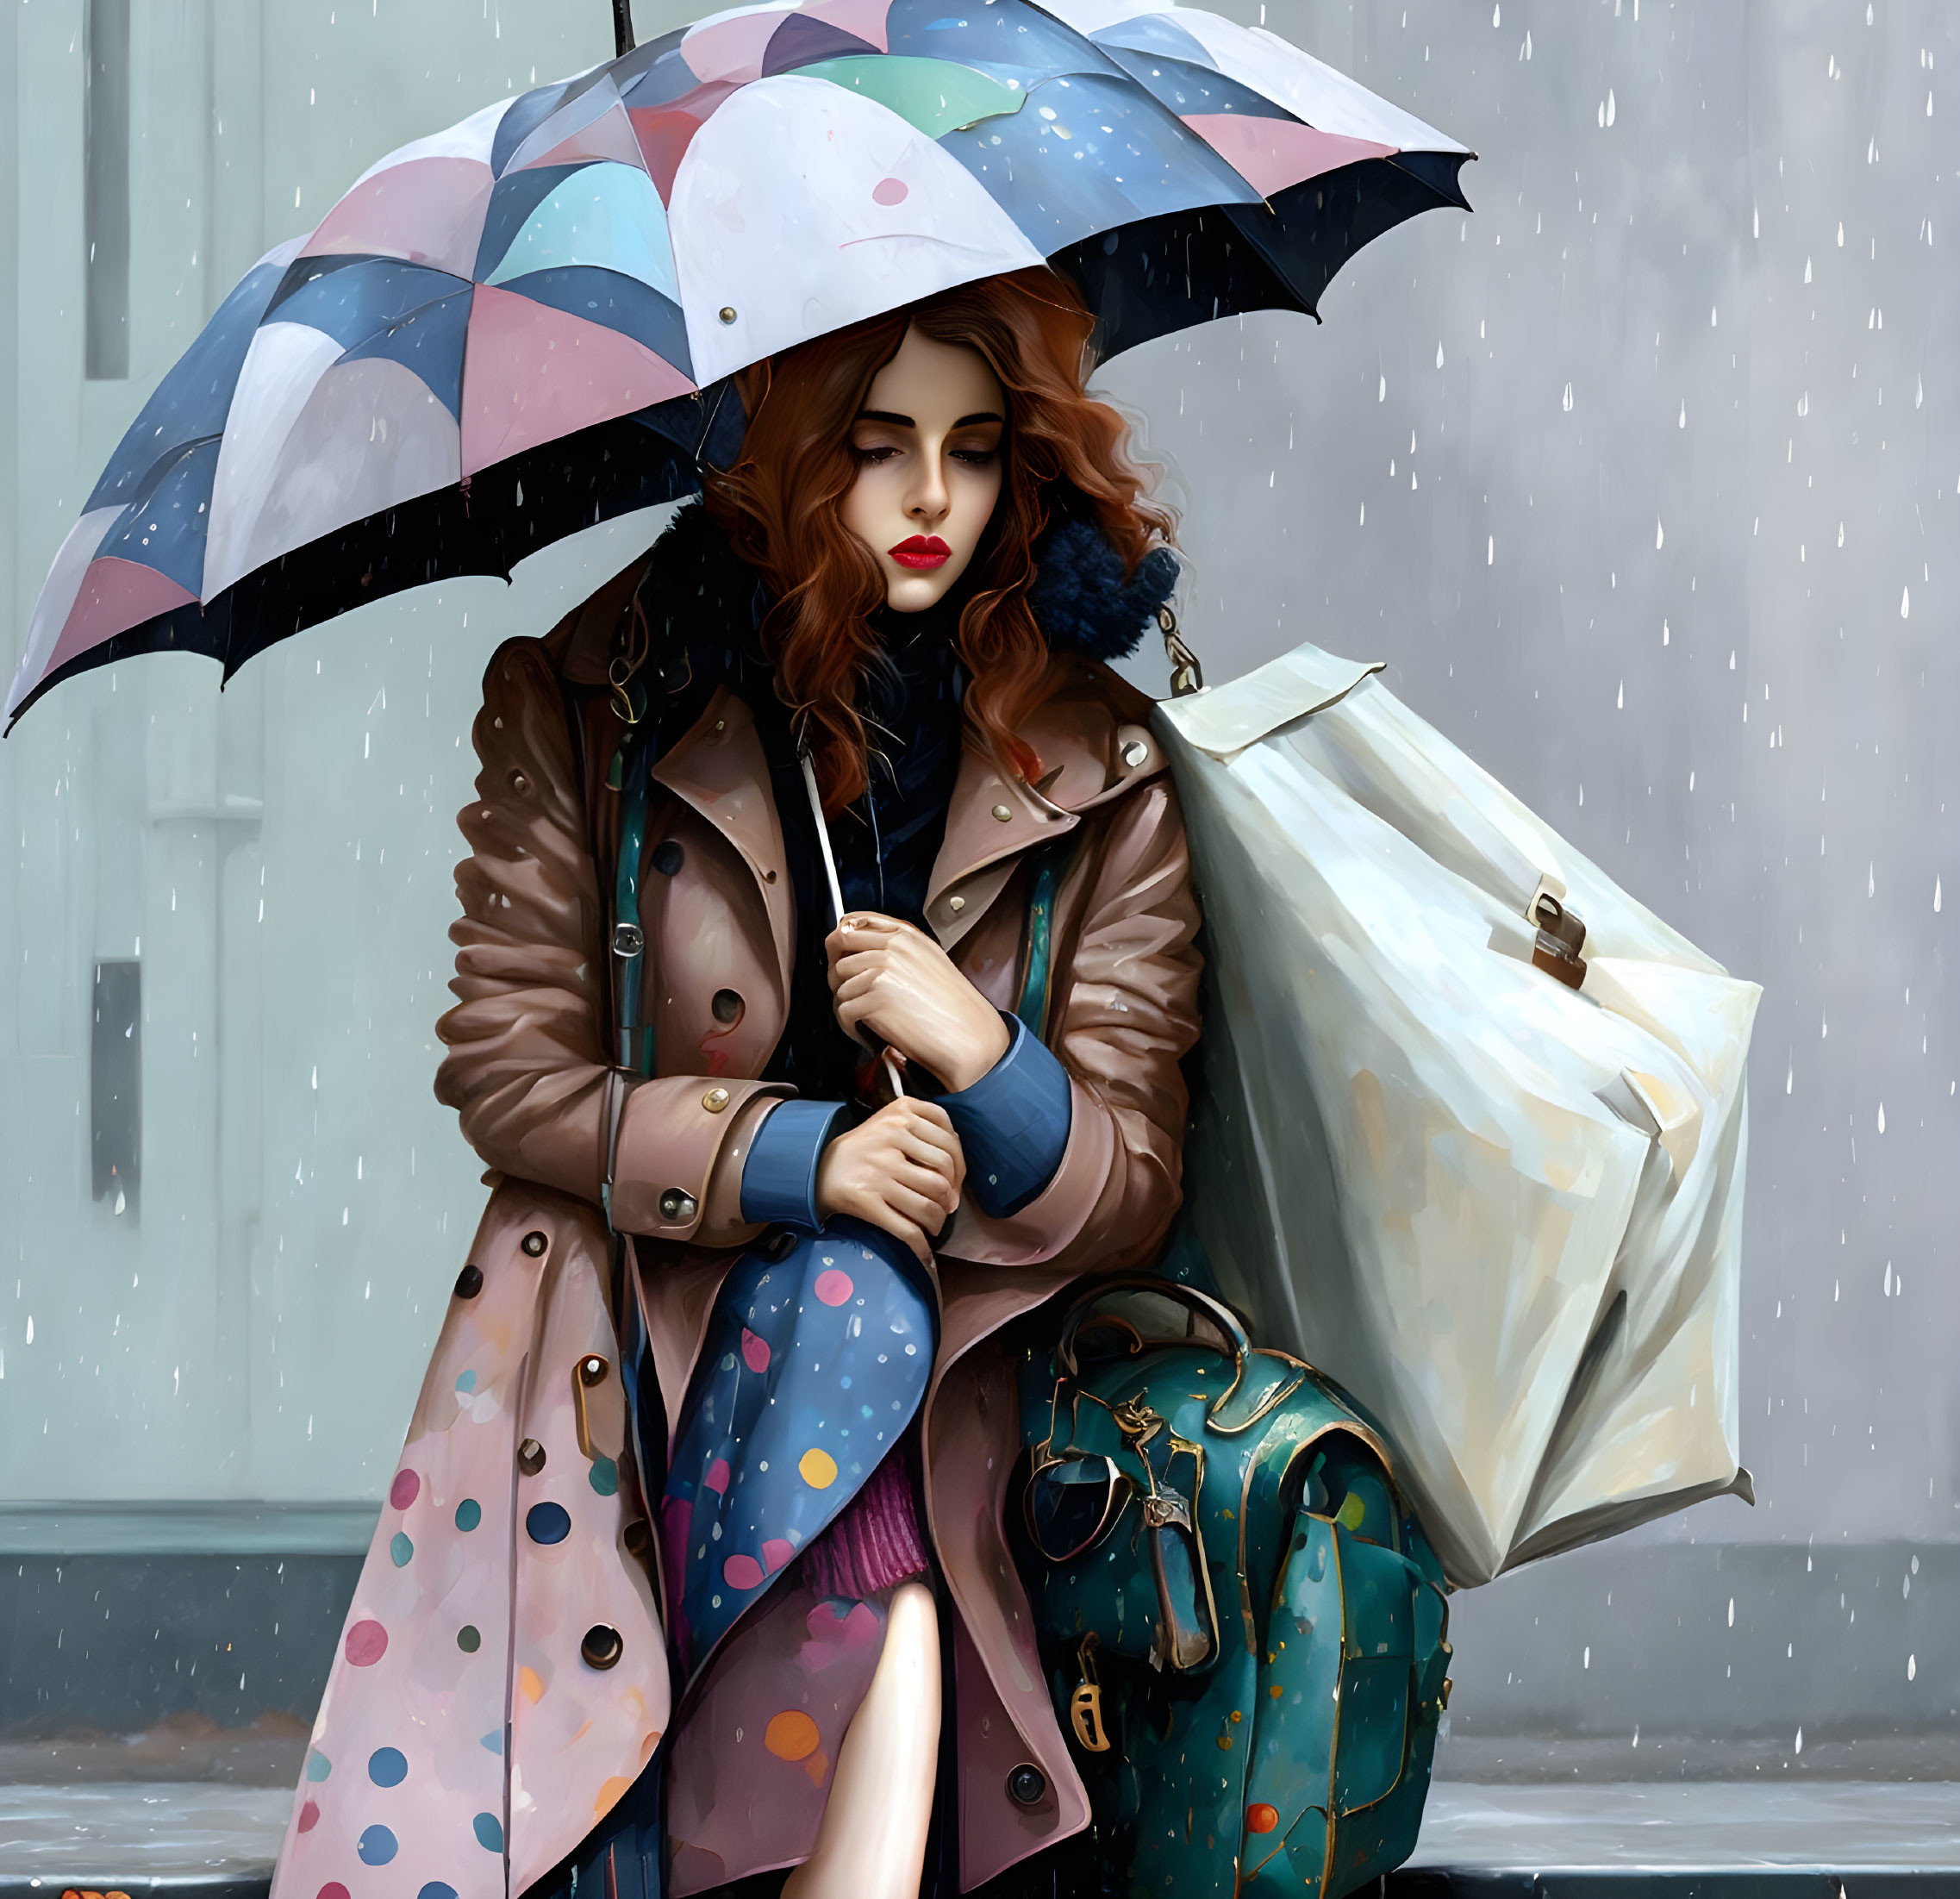 Red-haired woman under colorful umbrella in brown coat with beige tote in rain